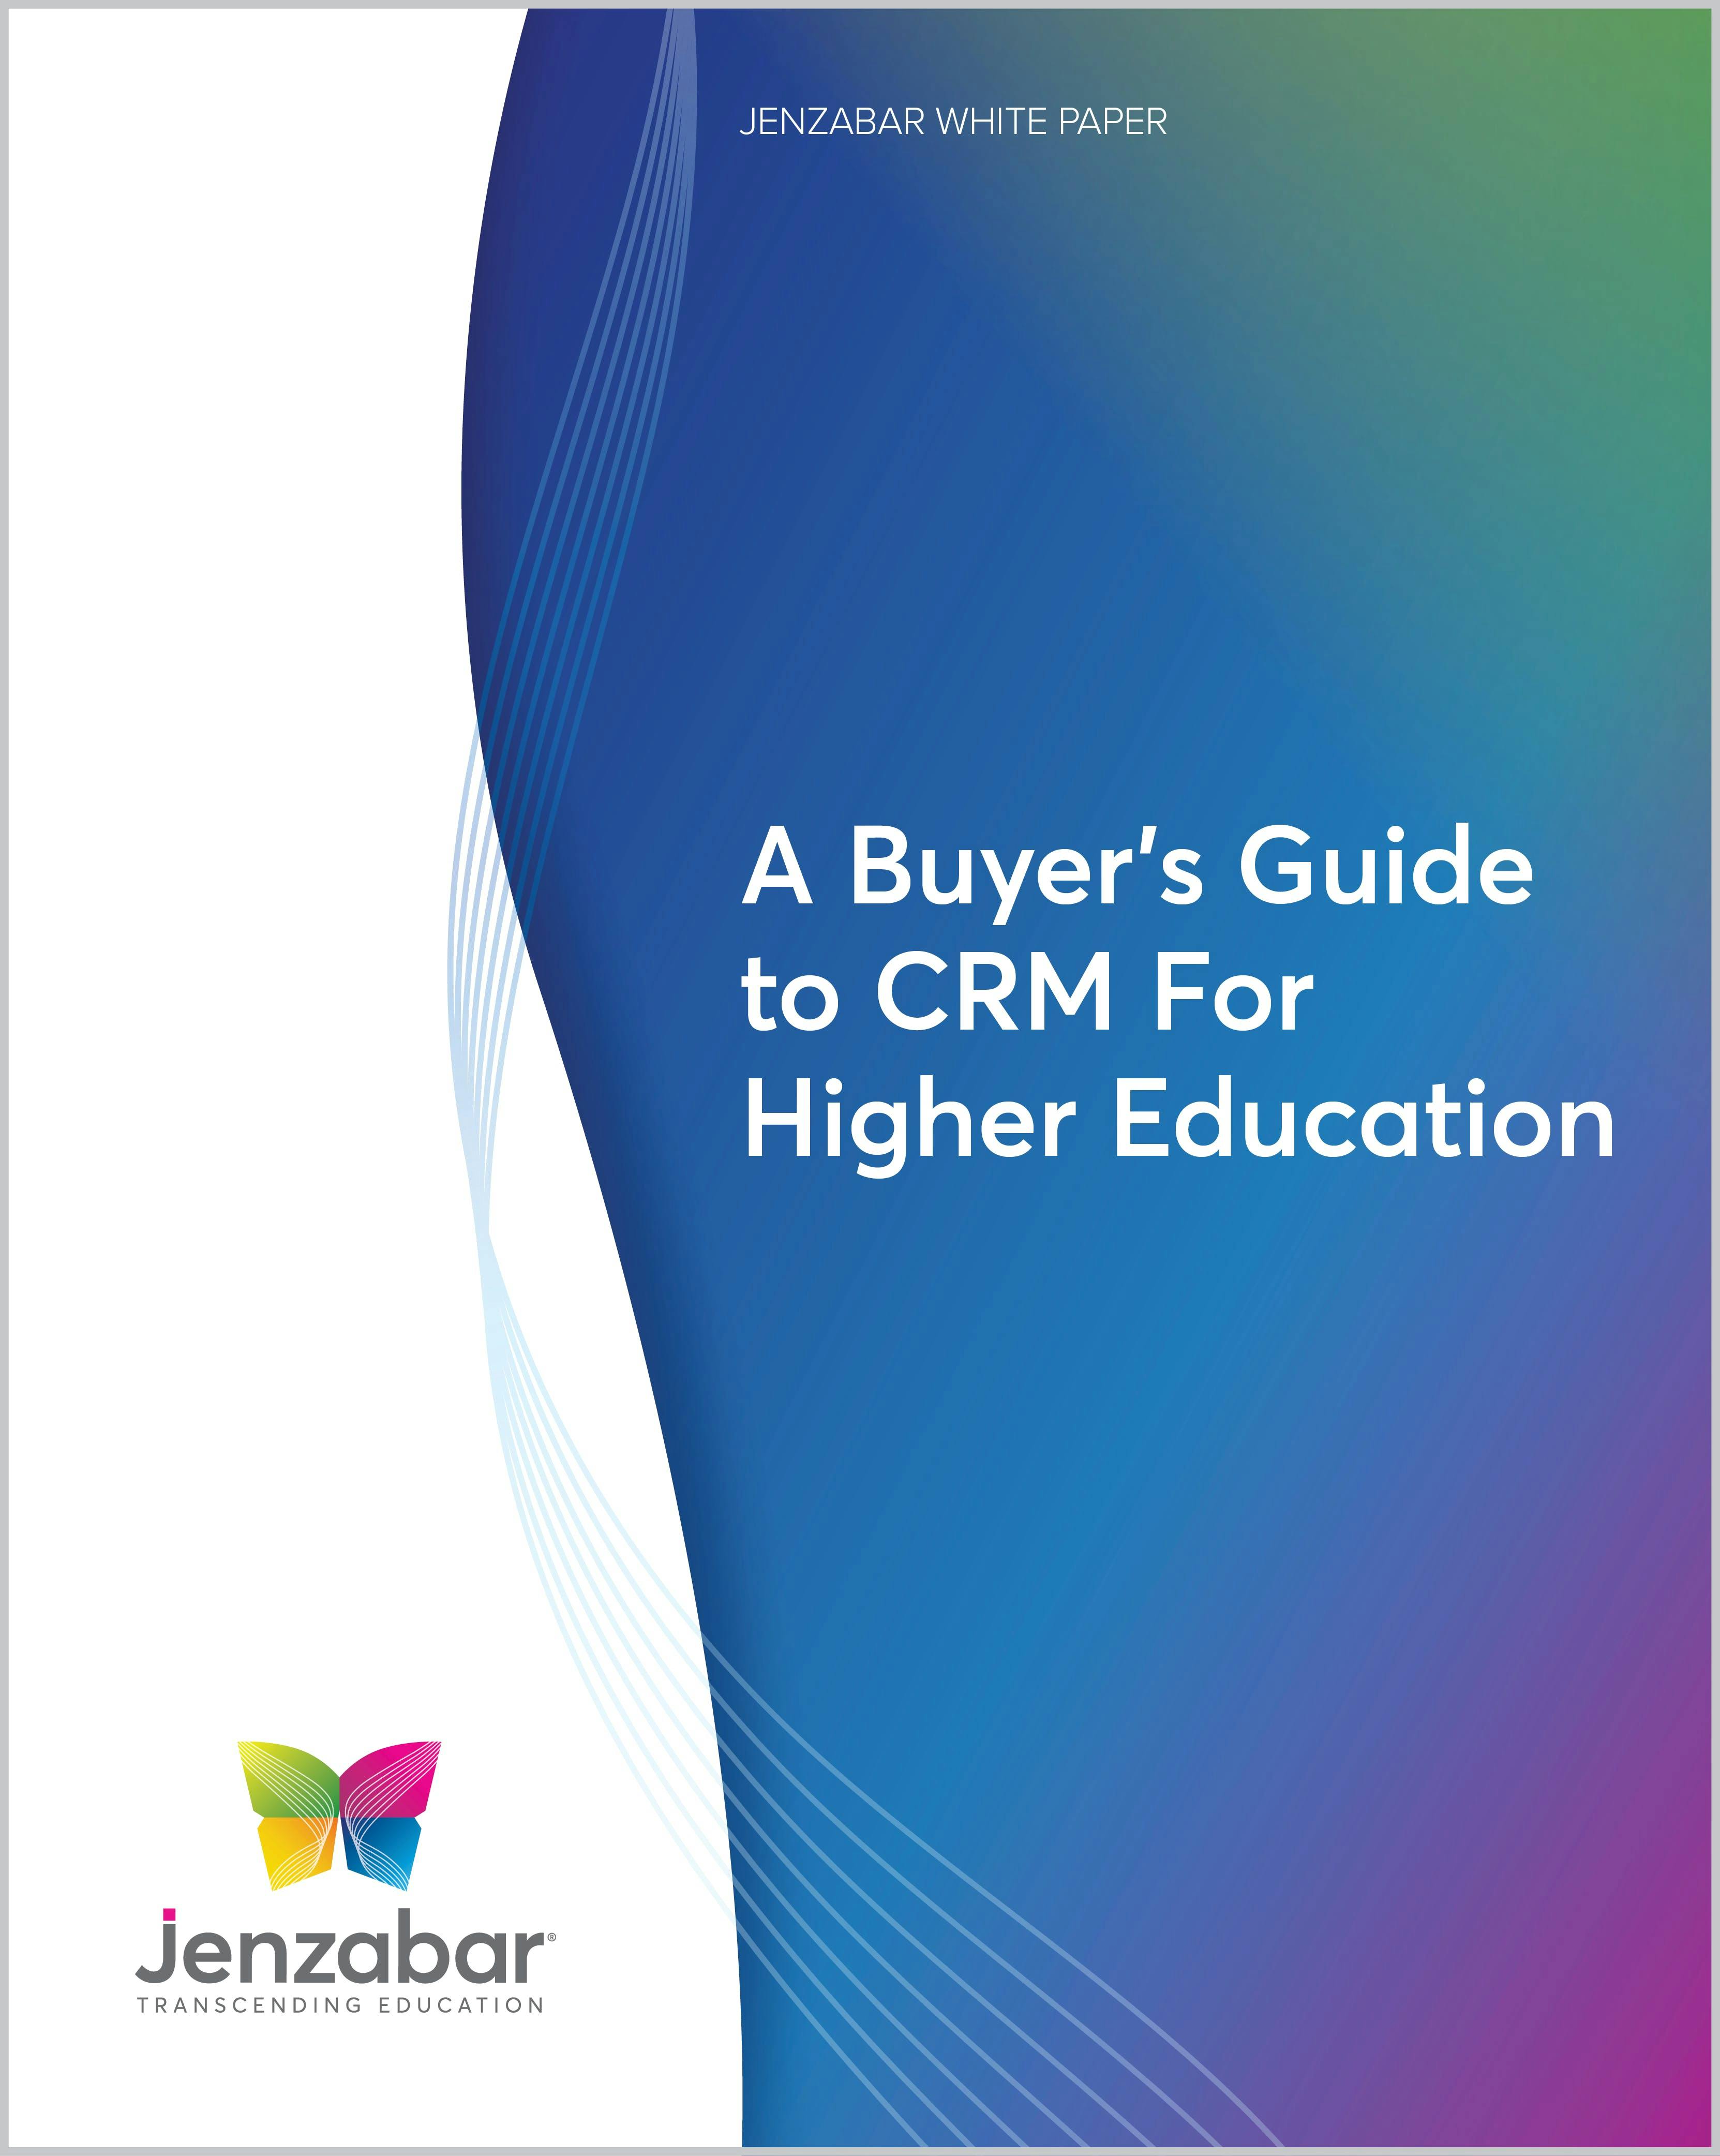 White Paper: A Buyer's Guide to CRM For Higher Education